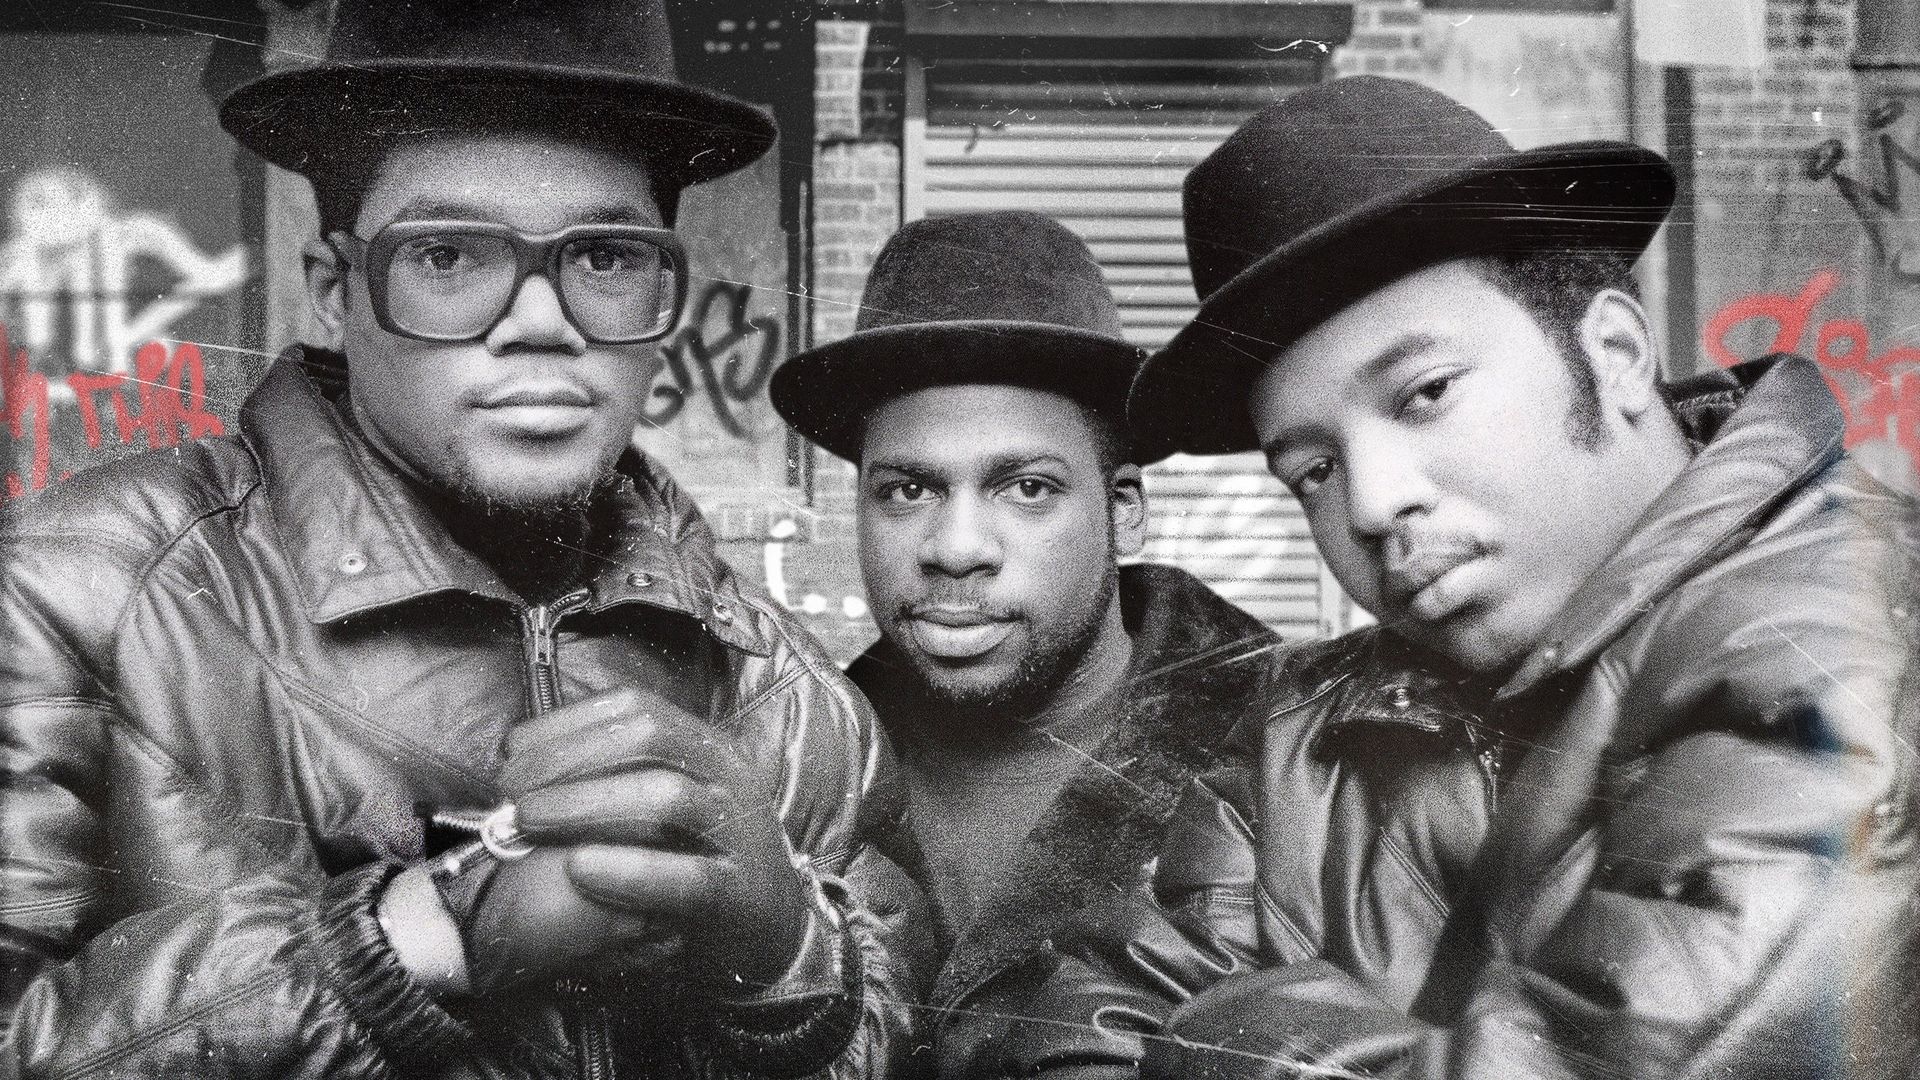 Kings from Queens: The Run DMC Story background